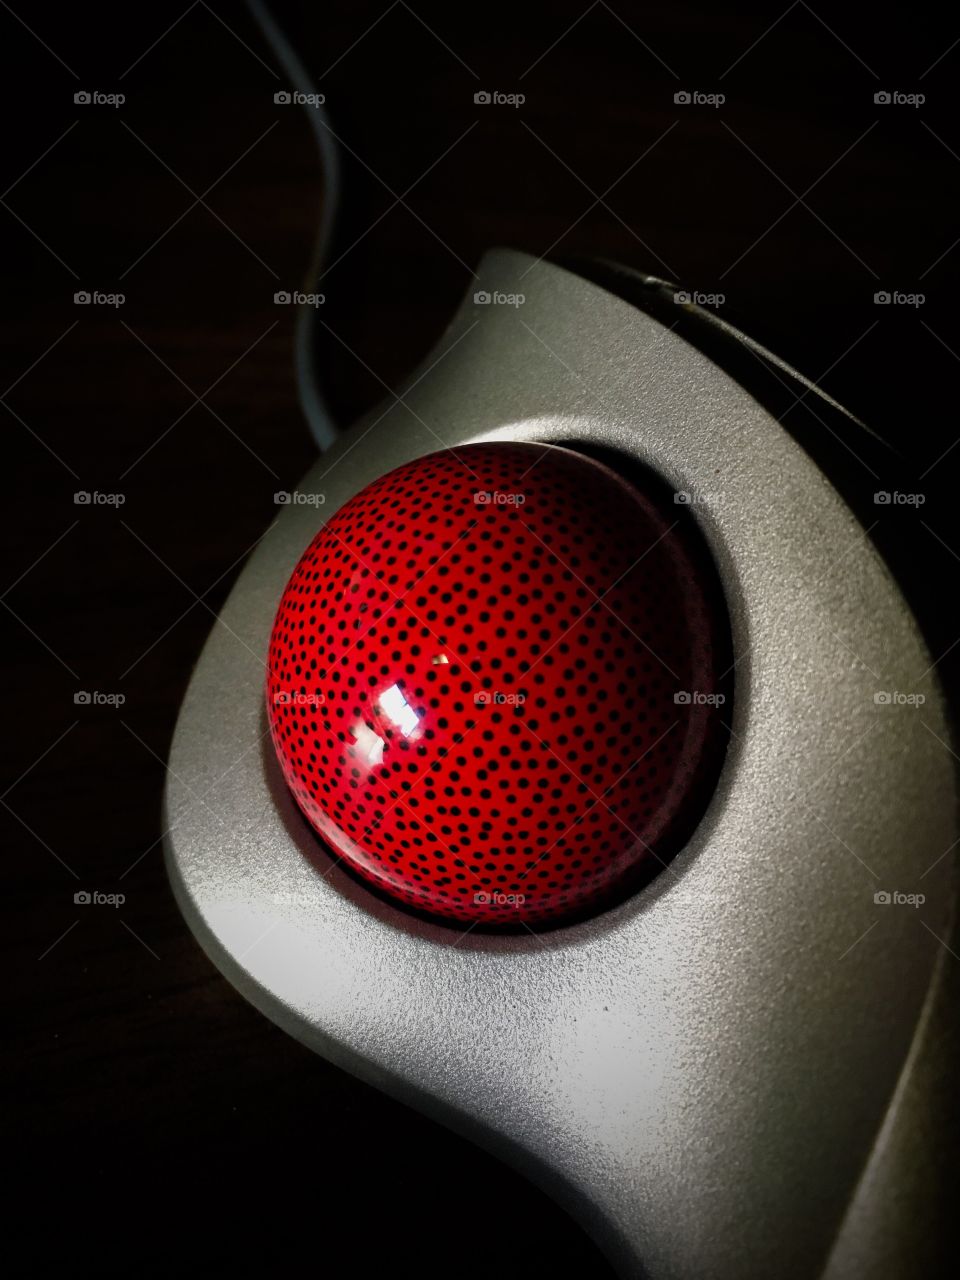 Silver thumb-controlled trackball mouse with a red ball with black specks on a black background